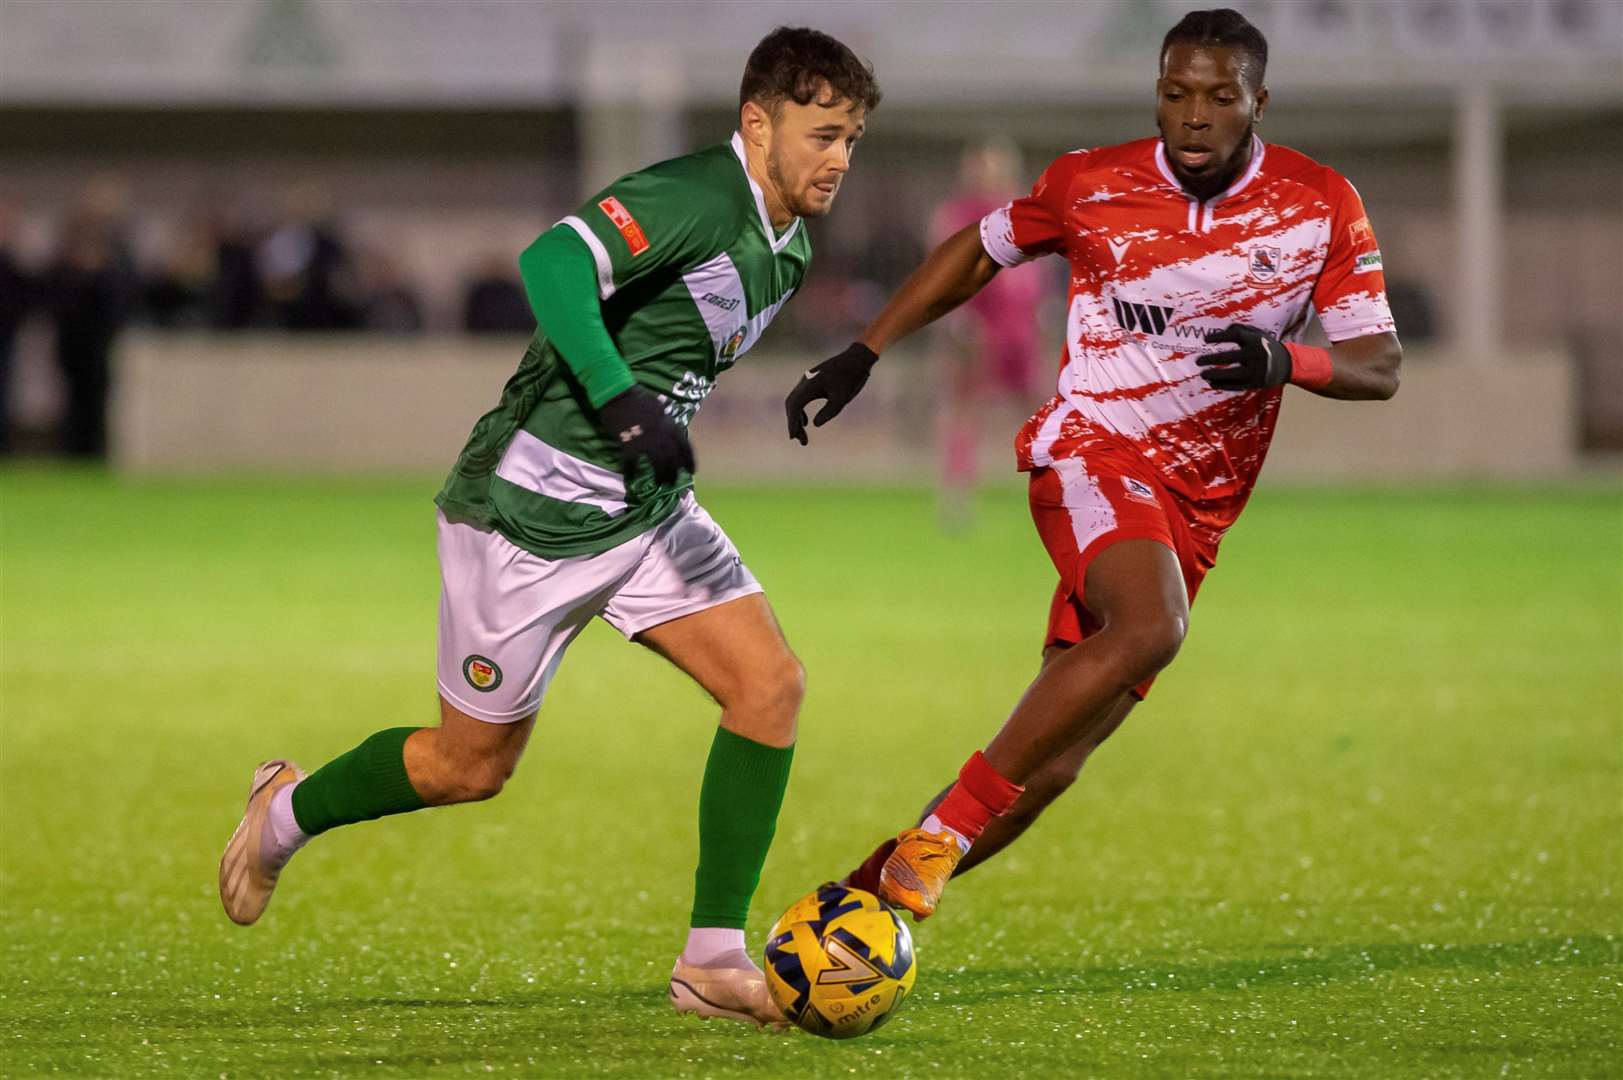 Danny Parish in action for Ashford United before his switch to Sittingbourne Picture: Ian Scammell